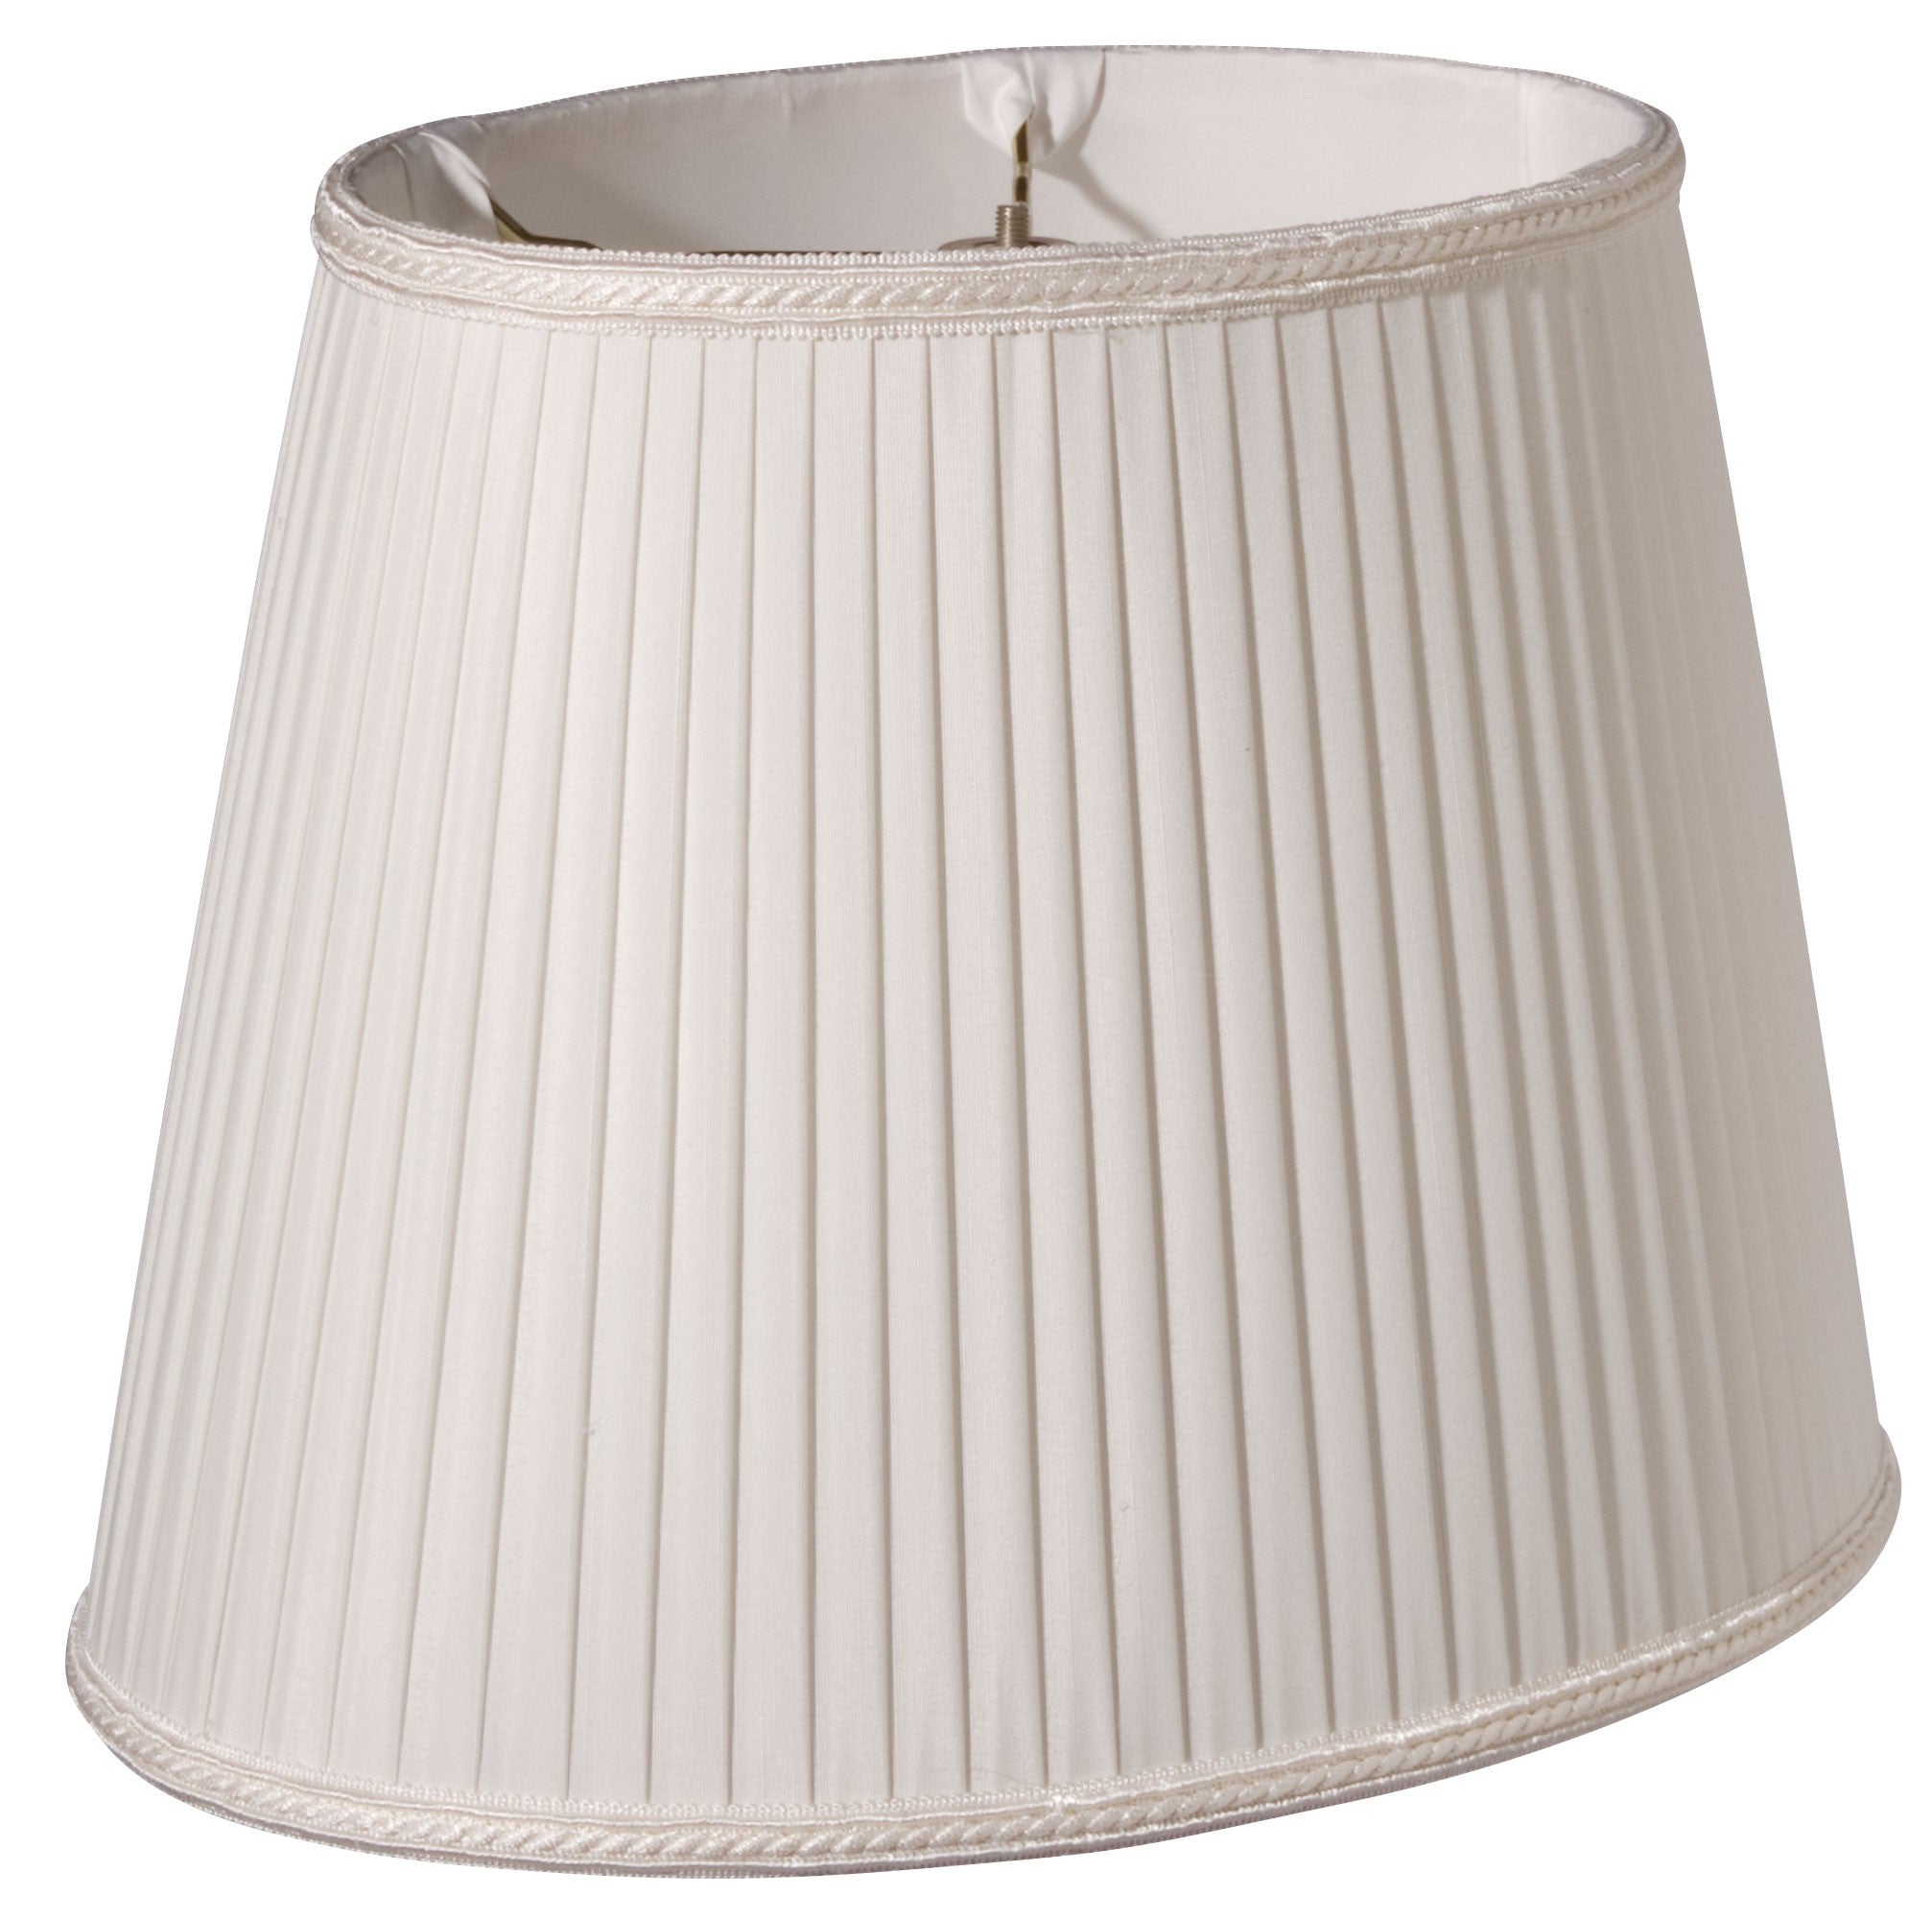 14" White Oval Side Pleat Paperback Shantung Lampshade